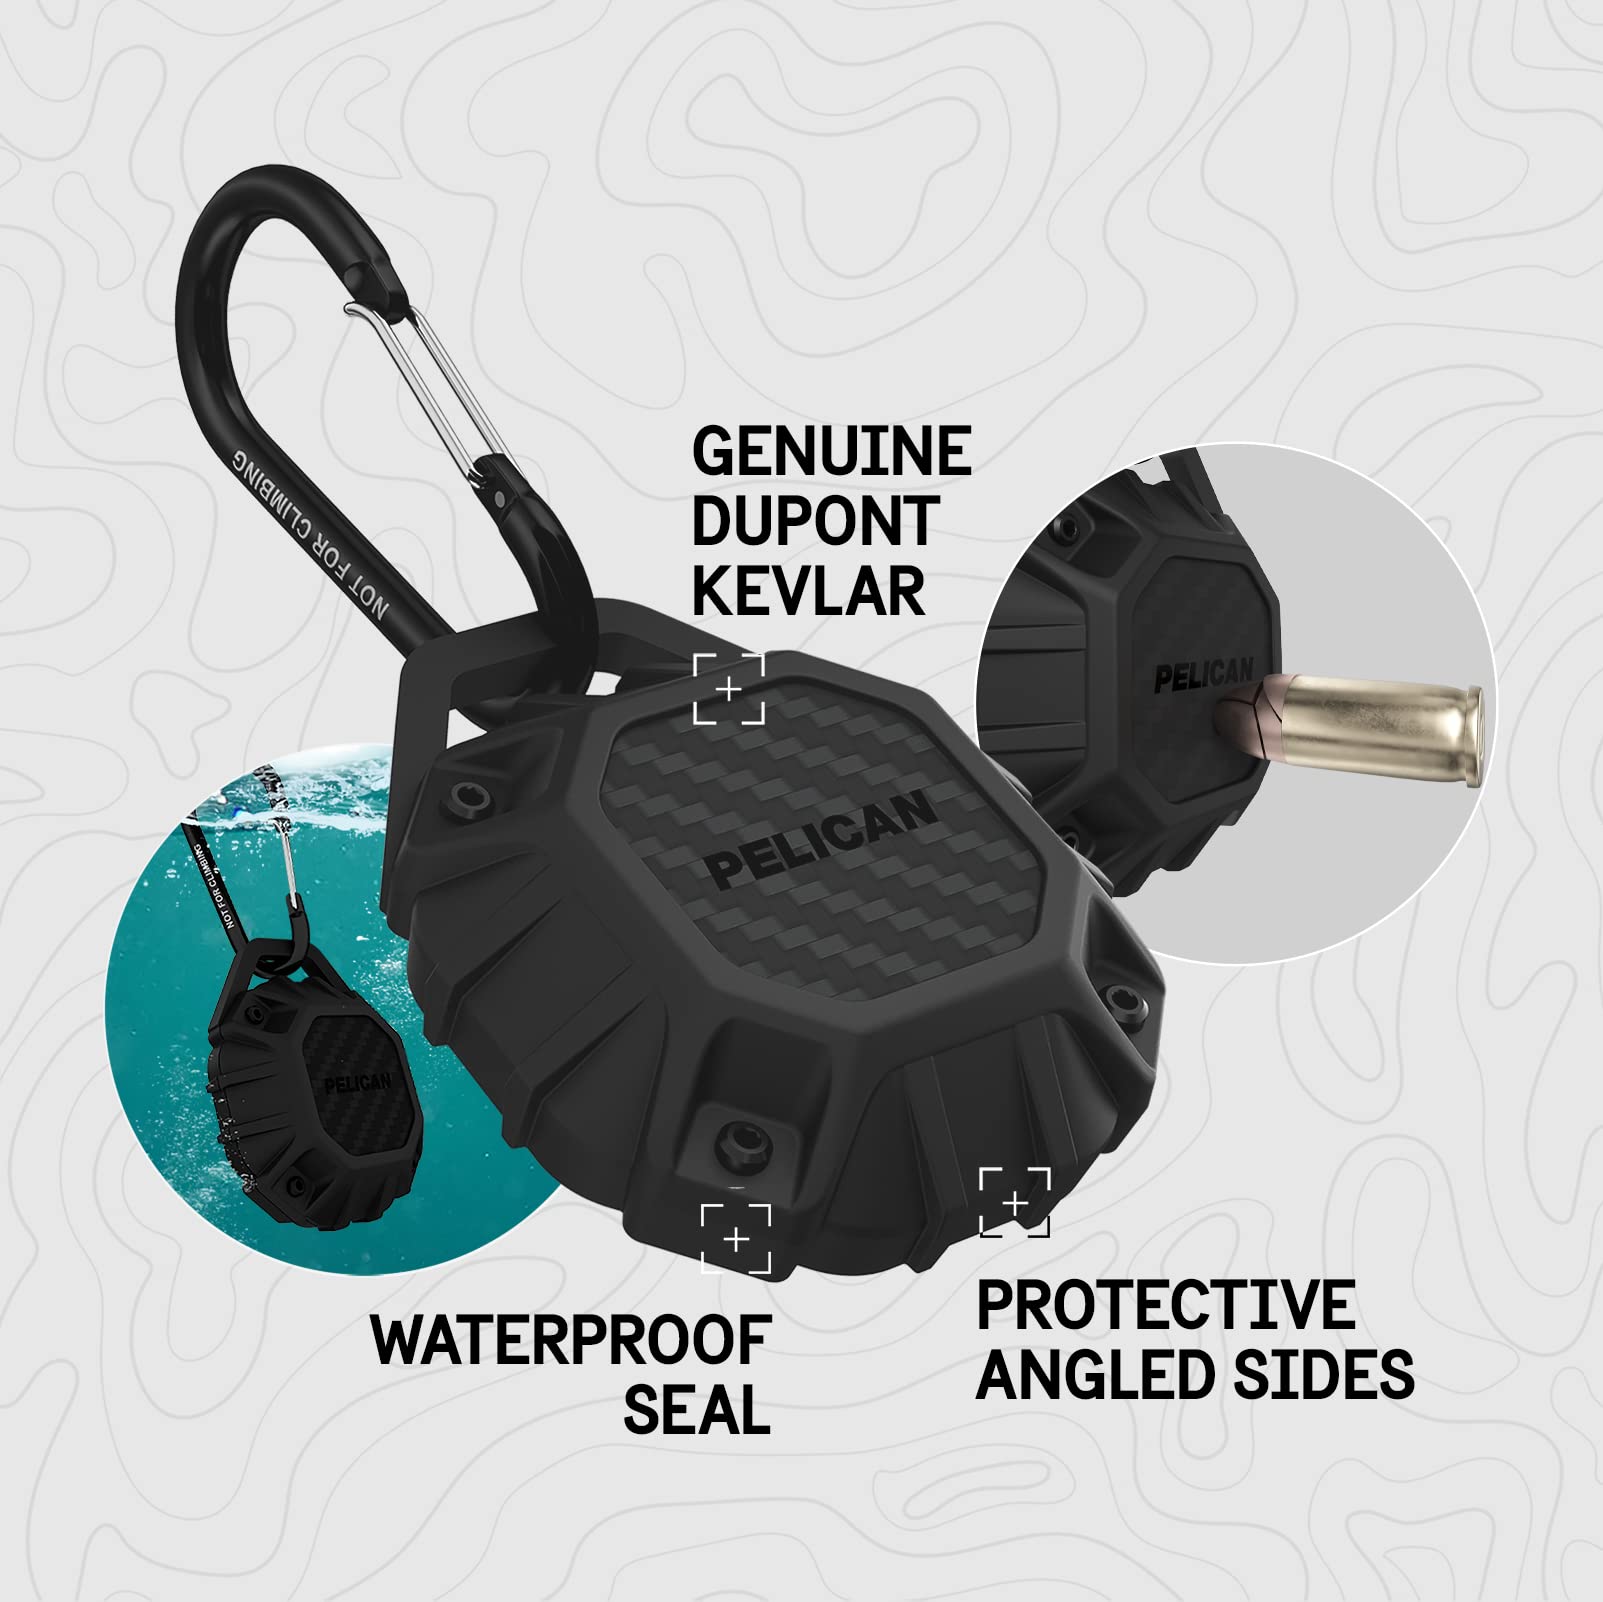 Pelican Marine AirTag Holder - Waterproof AirTag Keychain w/Carabiner Clip [Impact Resistant] [Travel Essentials] Protective Kevlar Apple Air Tag Case for Dog Collar, Backpack, Keys, Luggage - Black